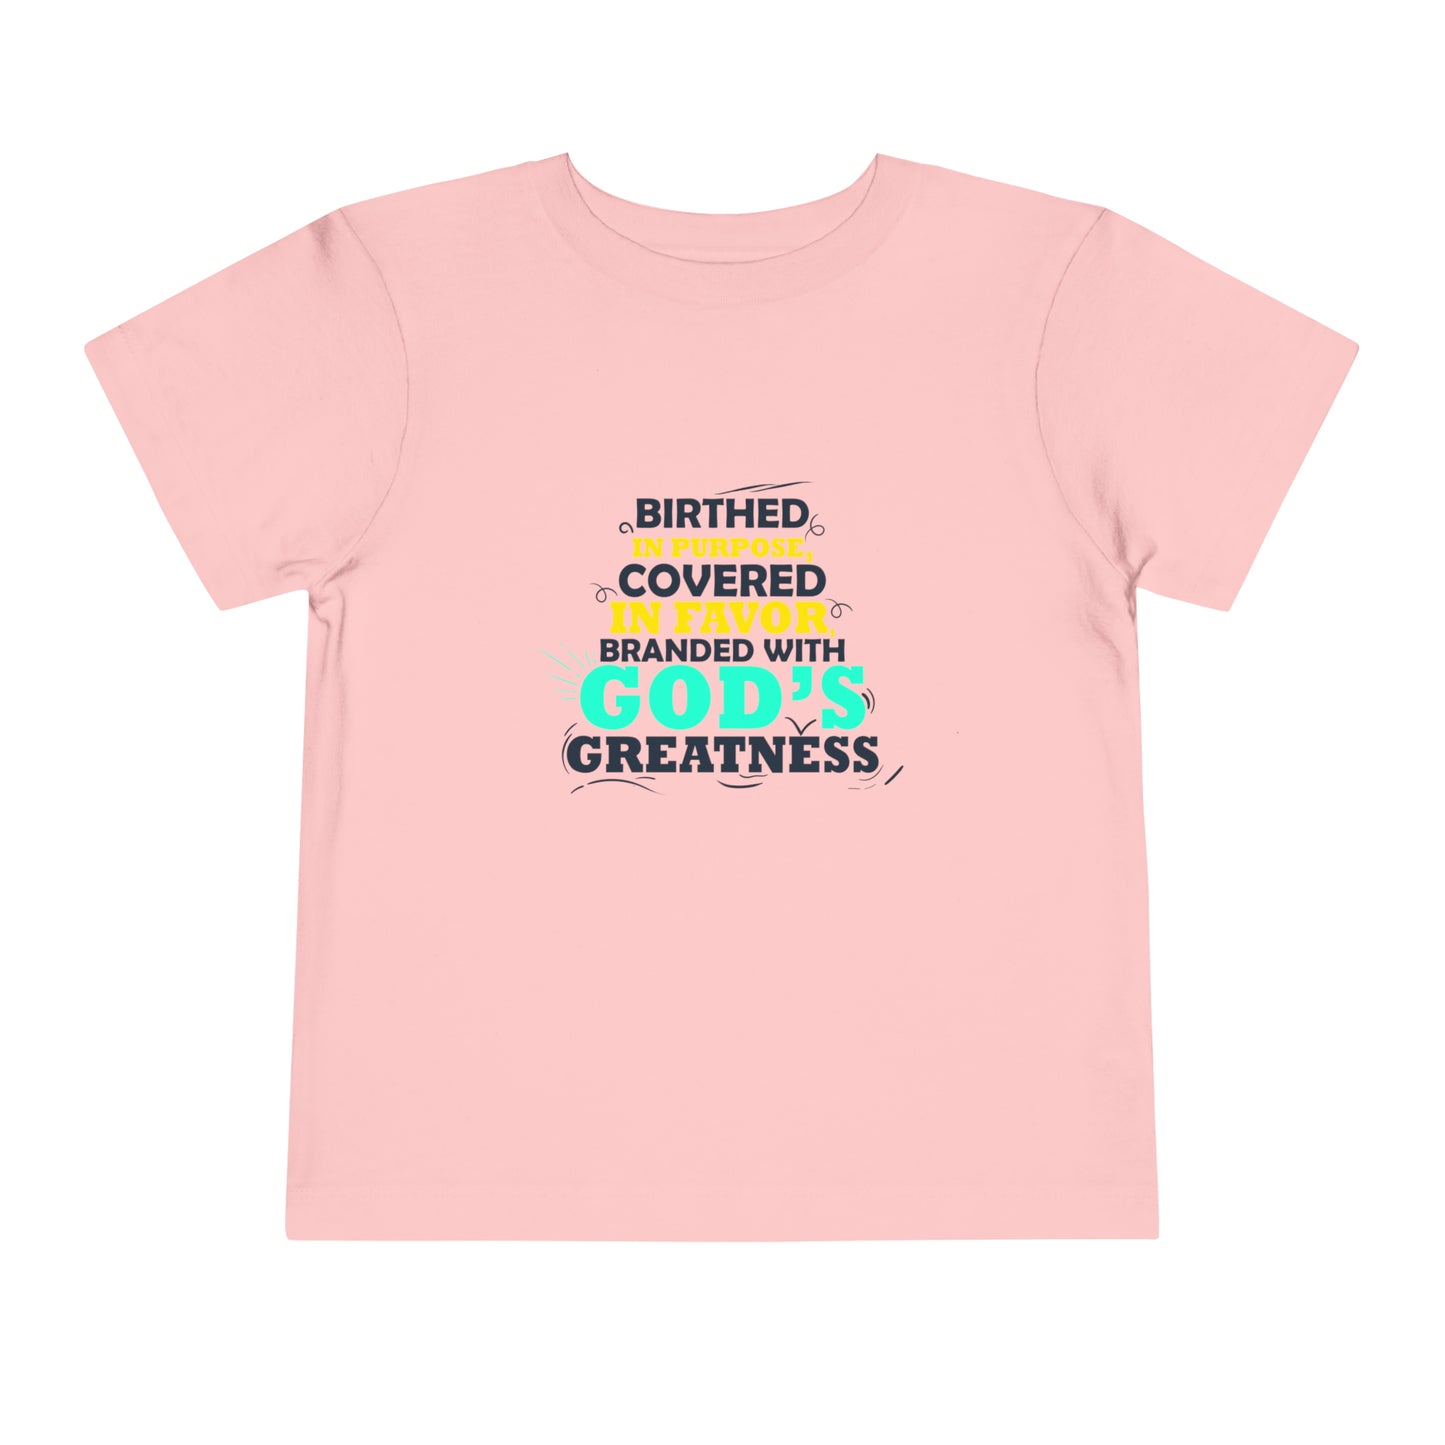 Birthed In Purpose Covered In Favor Branded With God's Greatness Toddler Christian T-Shirt Printify